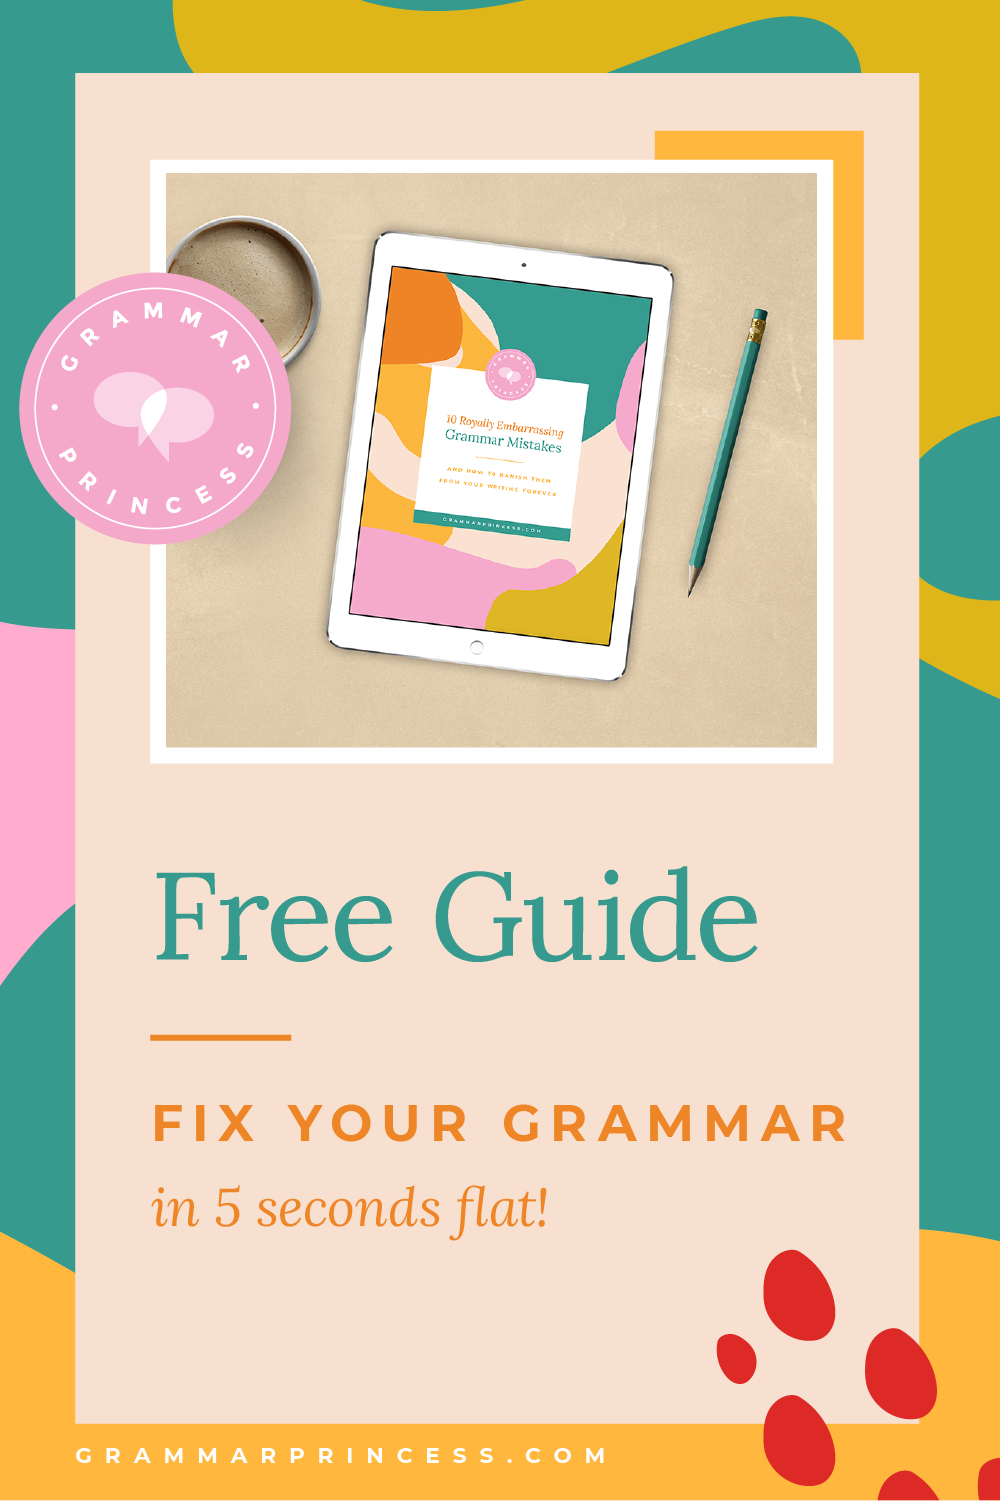 Tired of bad grammar making you look bad? This guide is for you! Download now for my top writing tips for business, common grammatical mistakes, and proper grammar for writing! #grammar #writing #business #grammartips